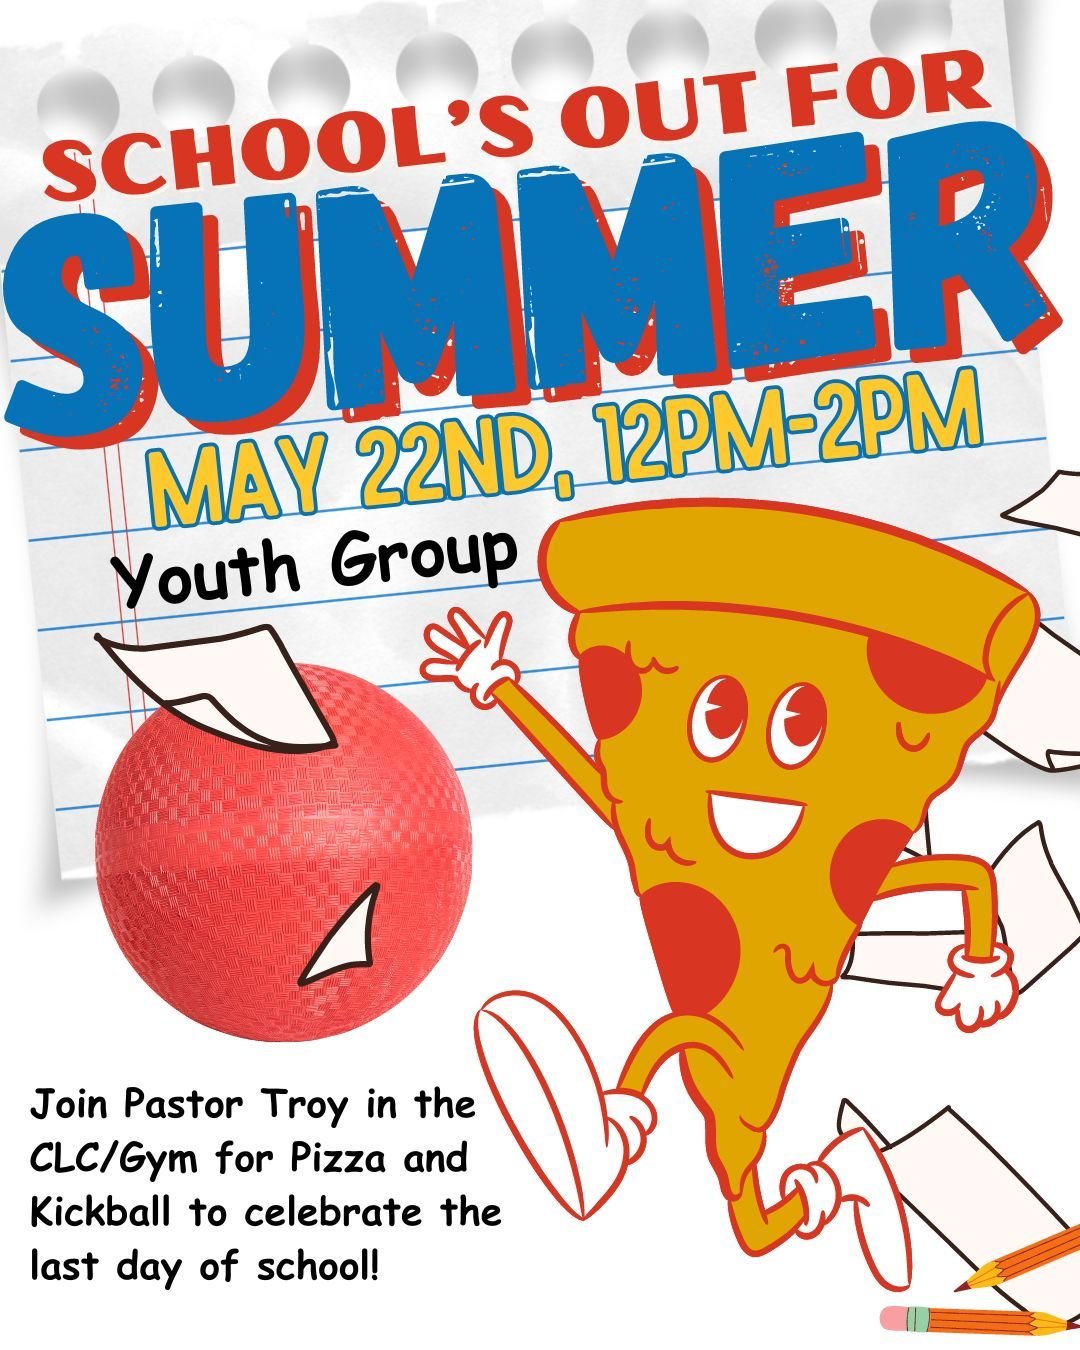 Summer Youth Events:  School&rsquo;s Out For Summer! Join Pastor Troy TODAY in the CLC/Gym for Pizza and Kickball to celebrate the last day of school. 12-2pm.
#fbcay #fbcaugustaks